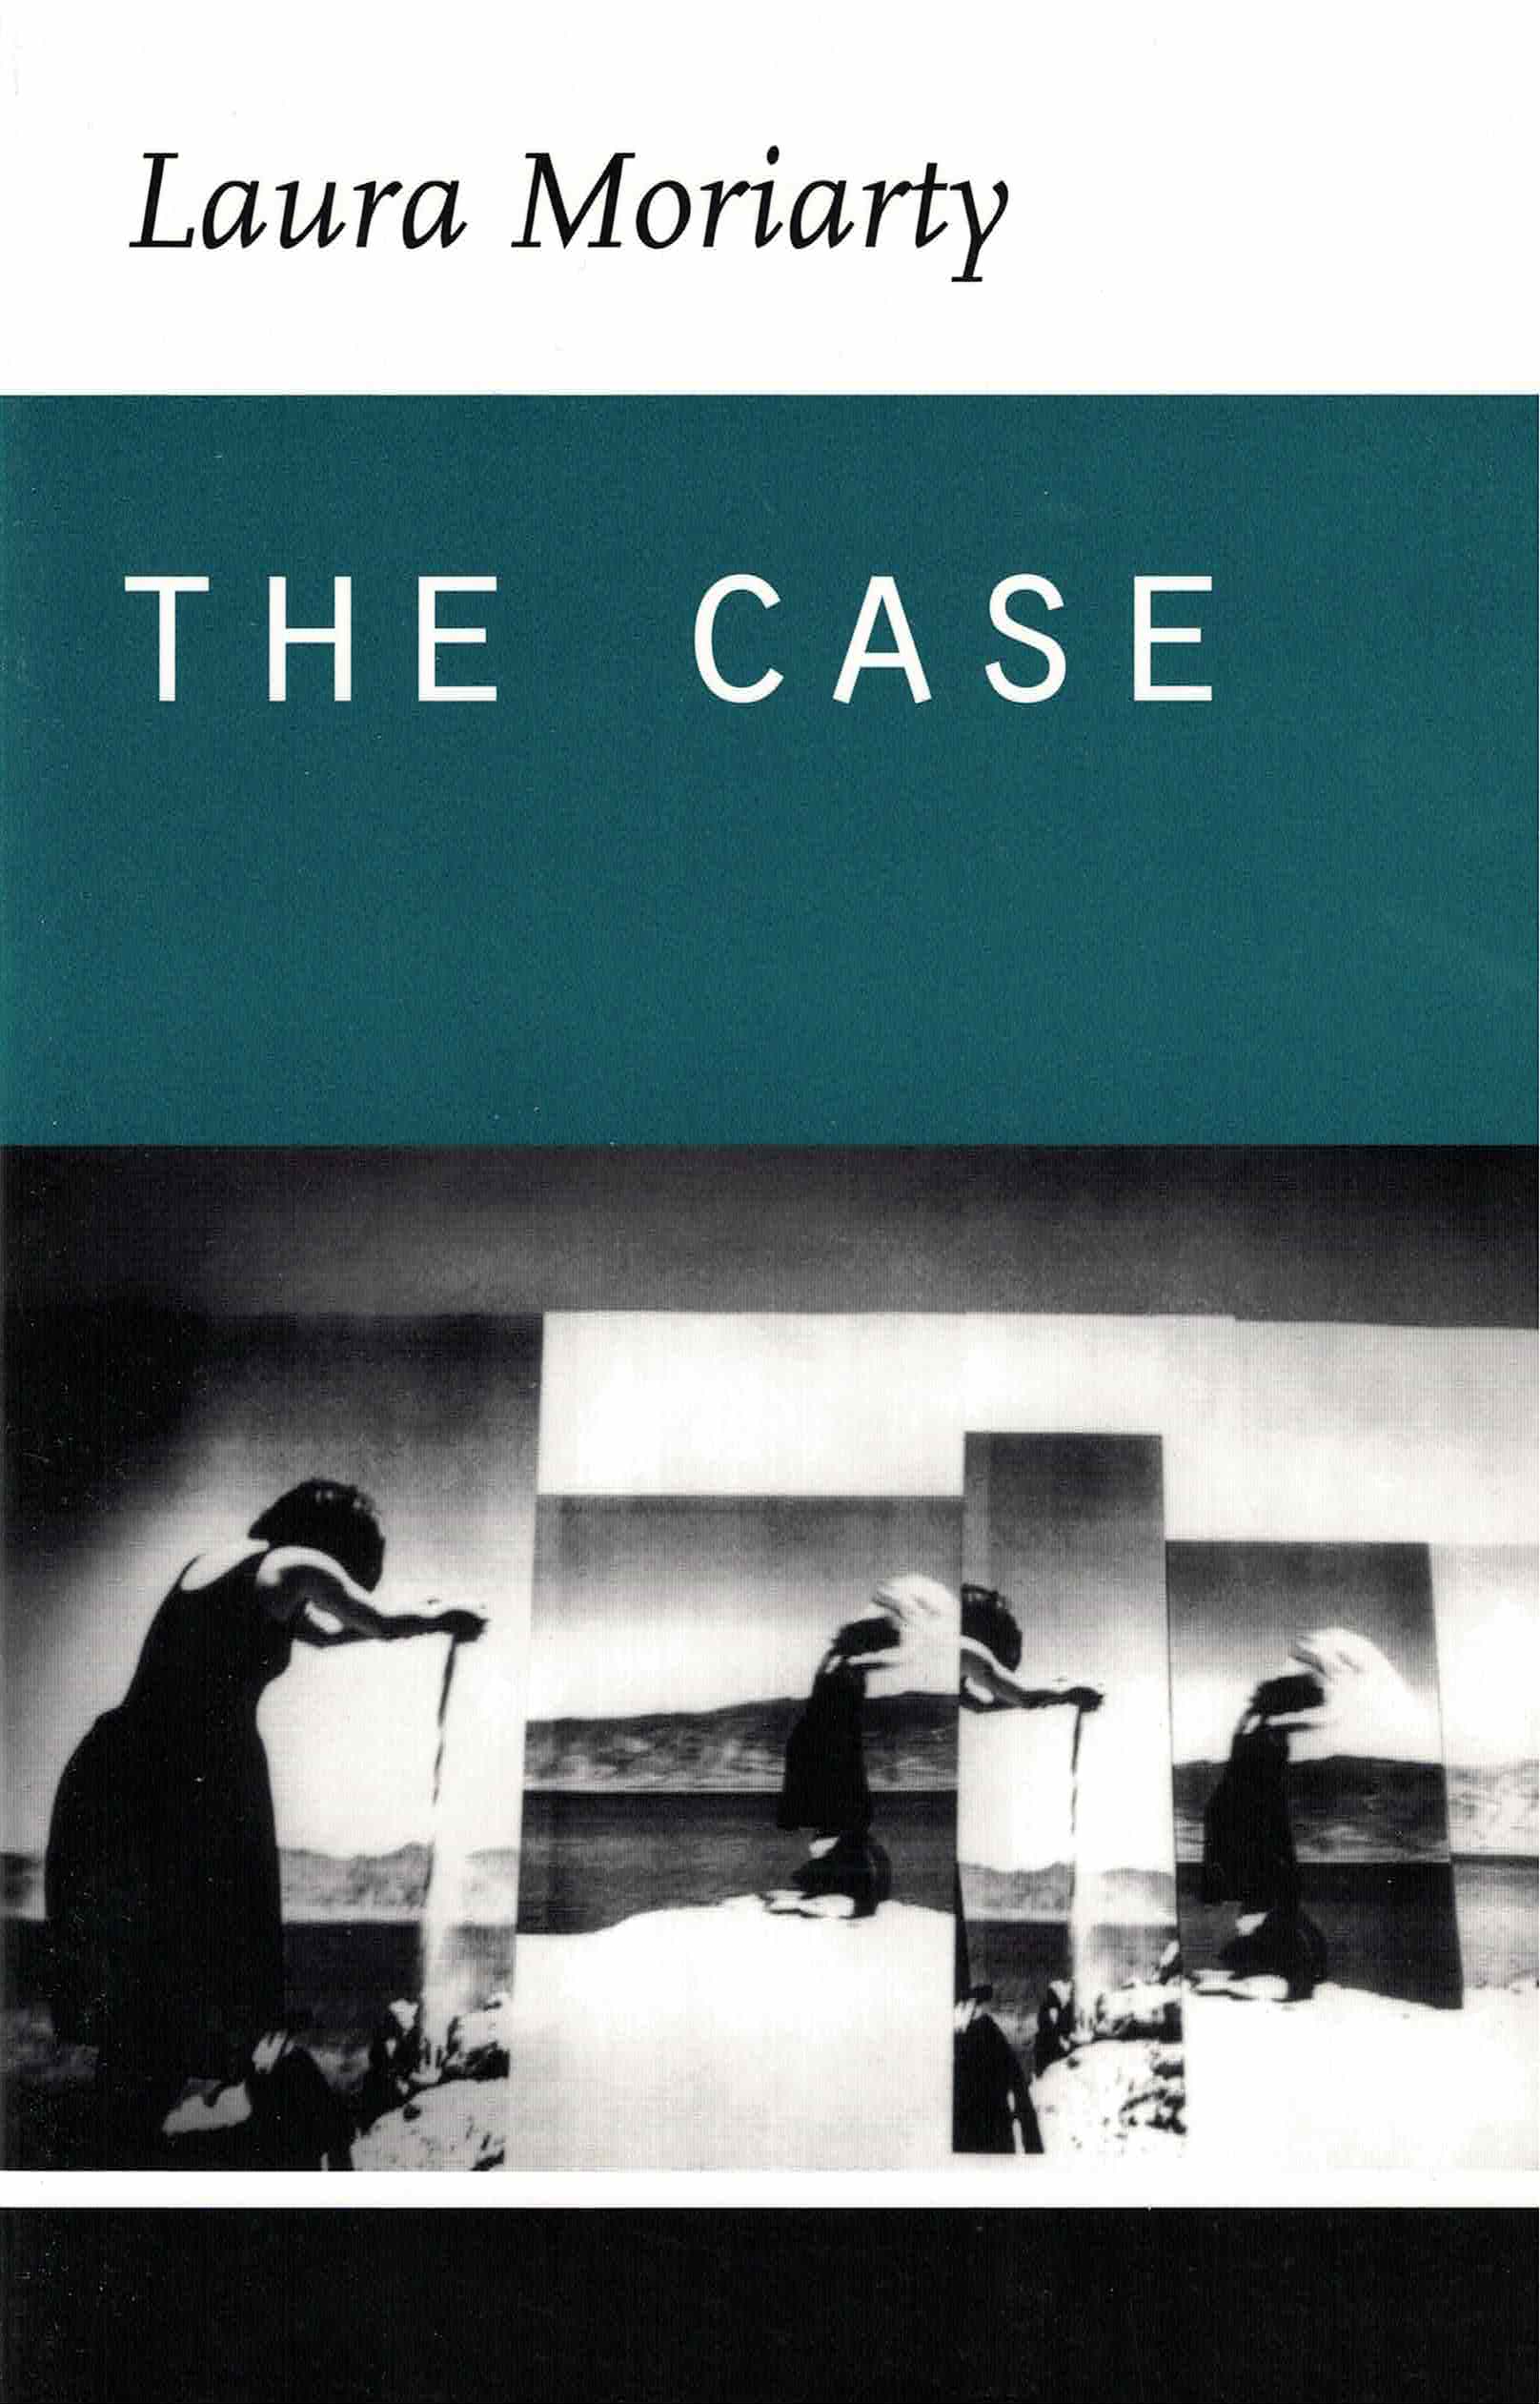 cover of The Case by Laura Moriarty, teal background at the top, the bottom half has a collaged time lapse b&w image of a woman in a dress sifting sand through her fingers and throwing it in the air at a lakeside